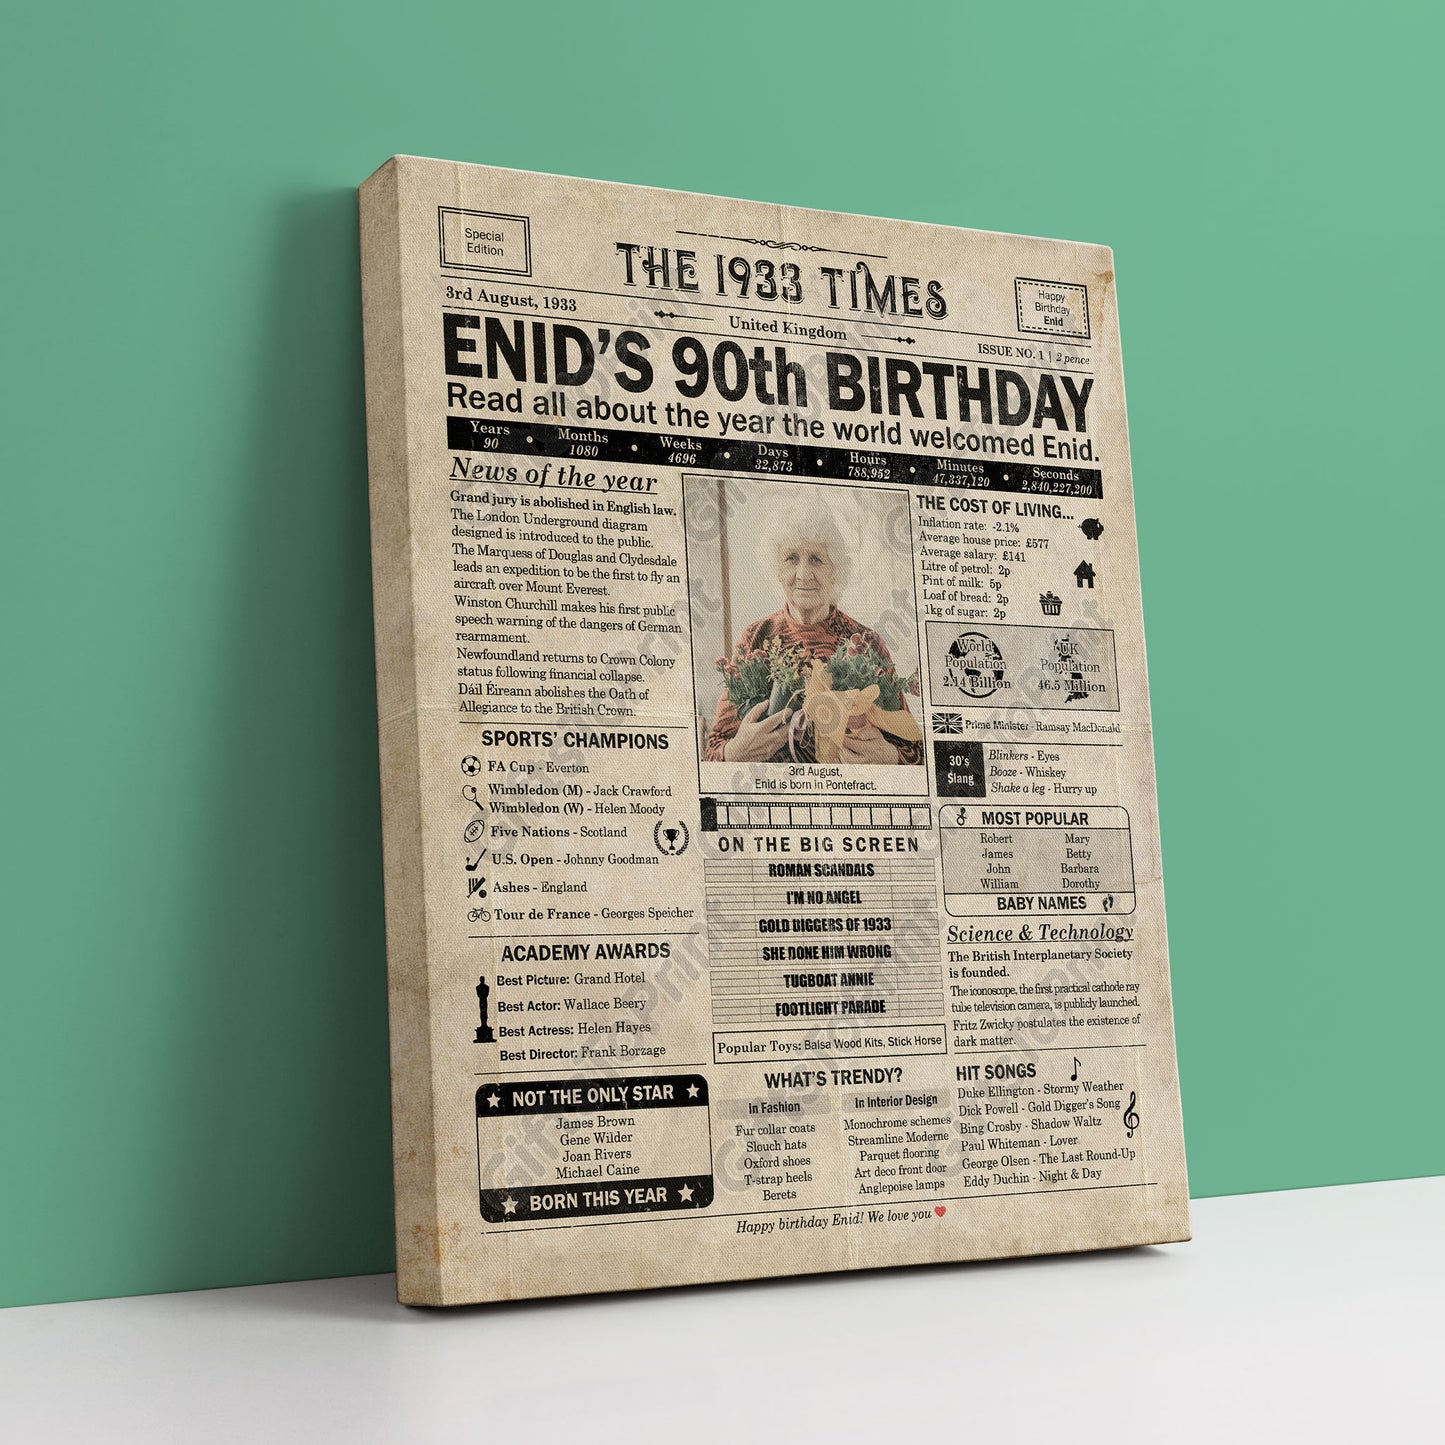 Personalised 90th Birthday Gift: A Printable UK Birthday Poster of 1933